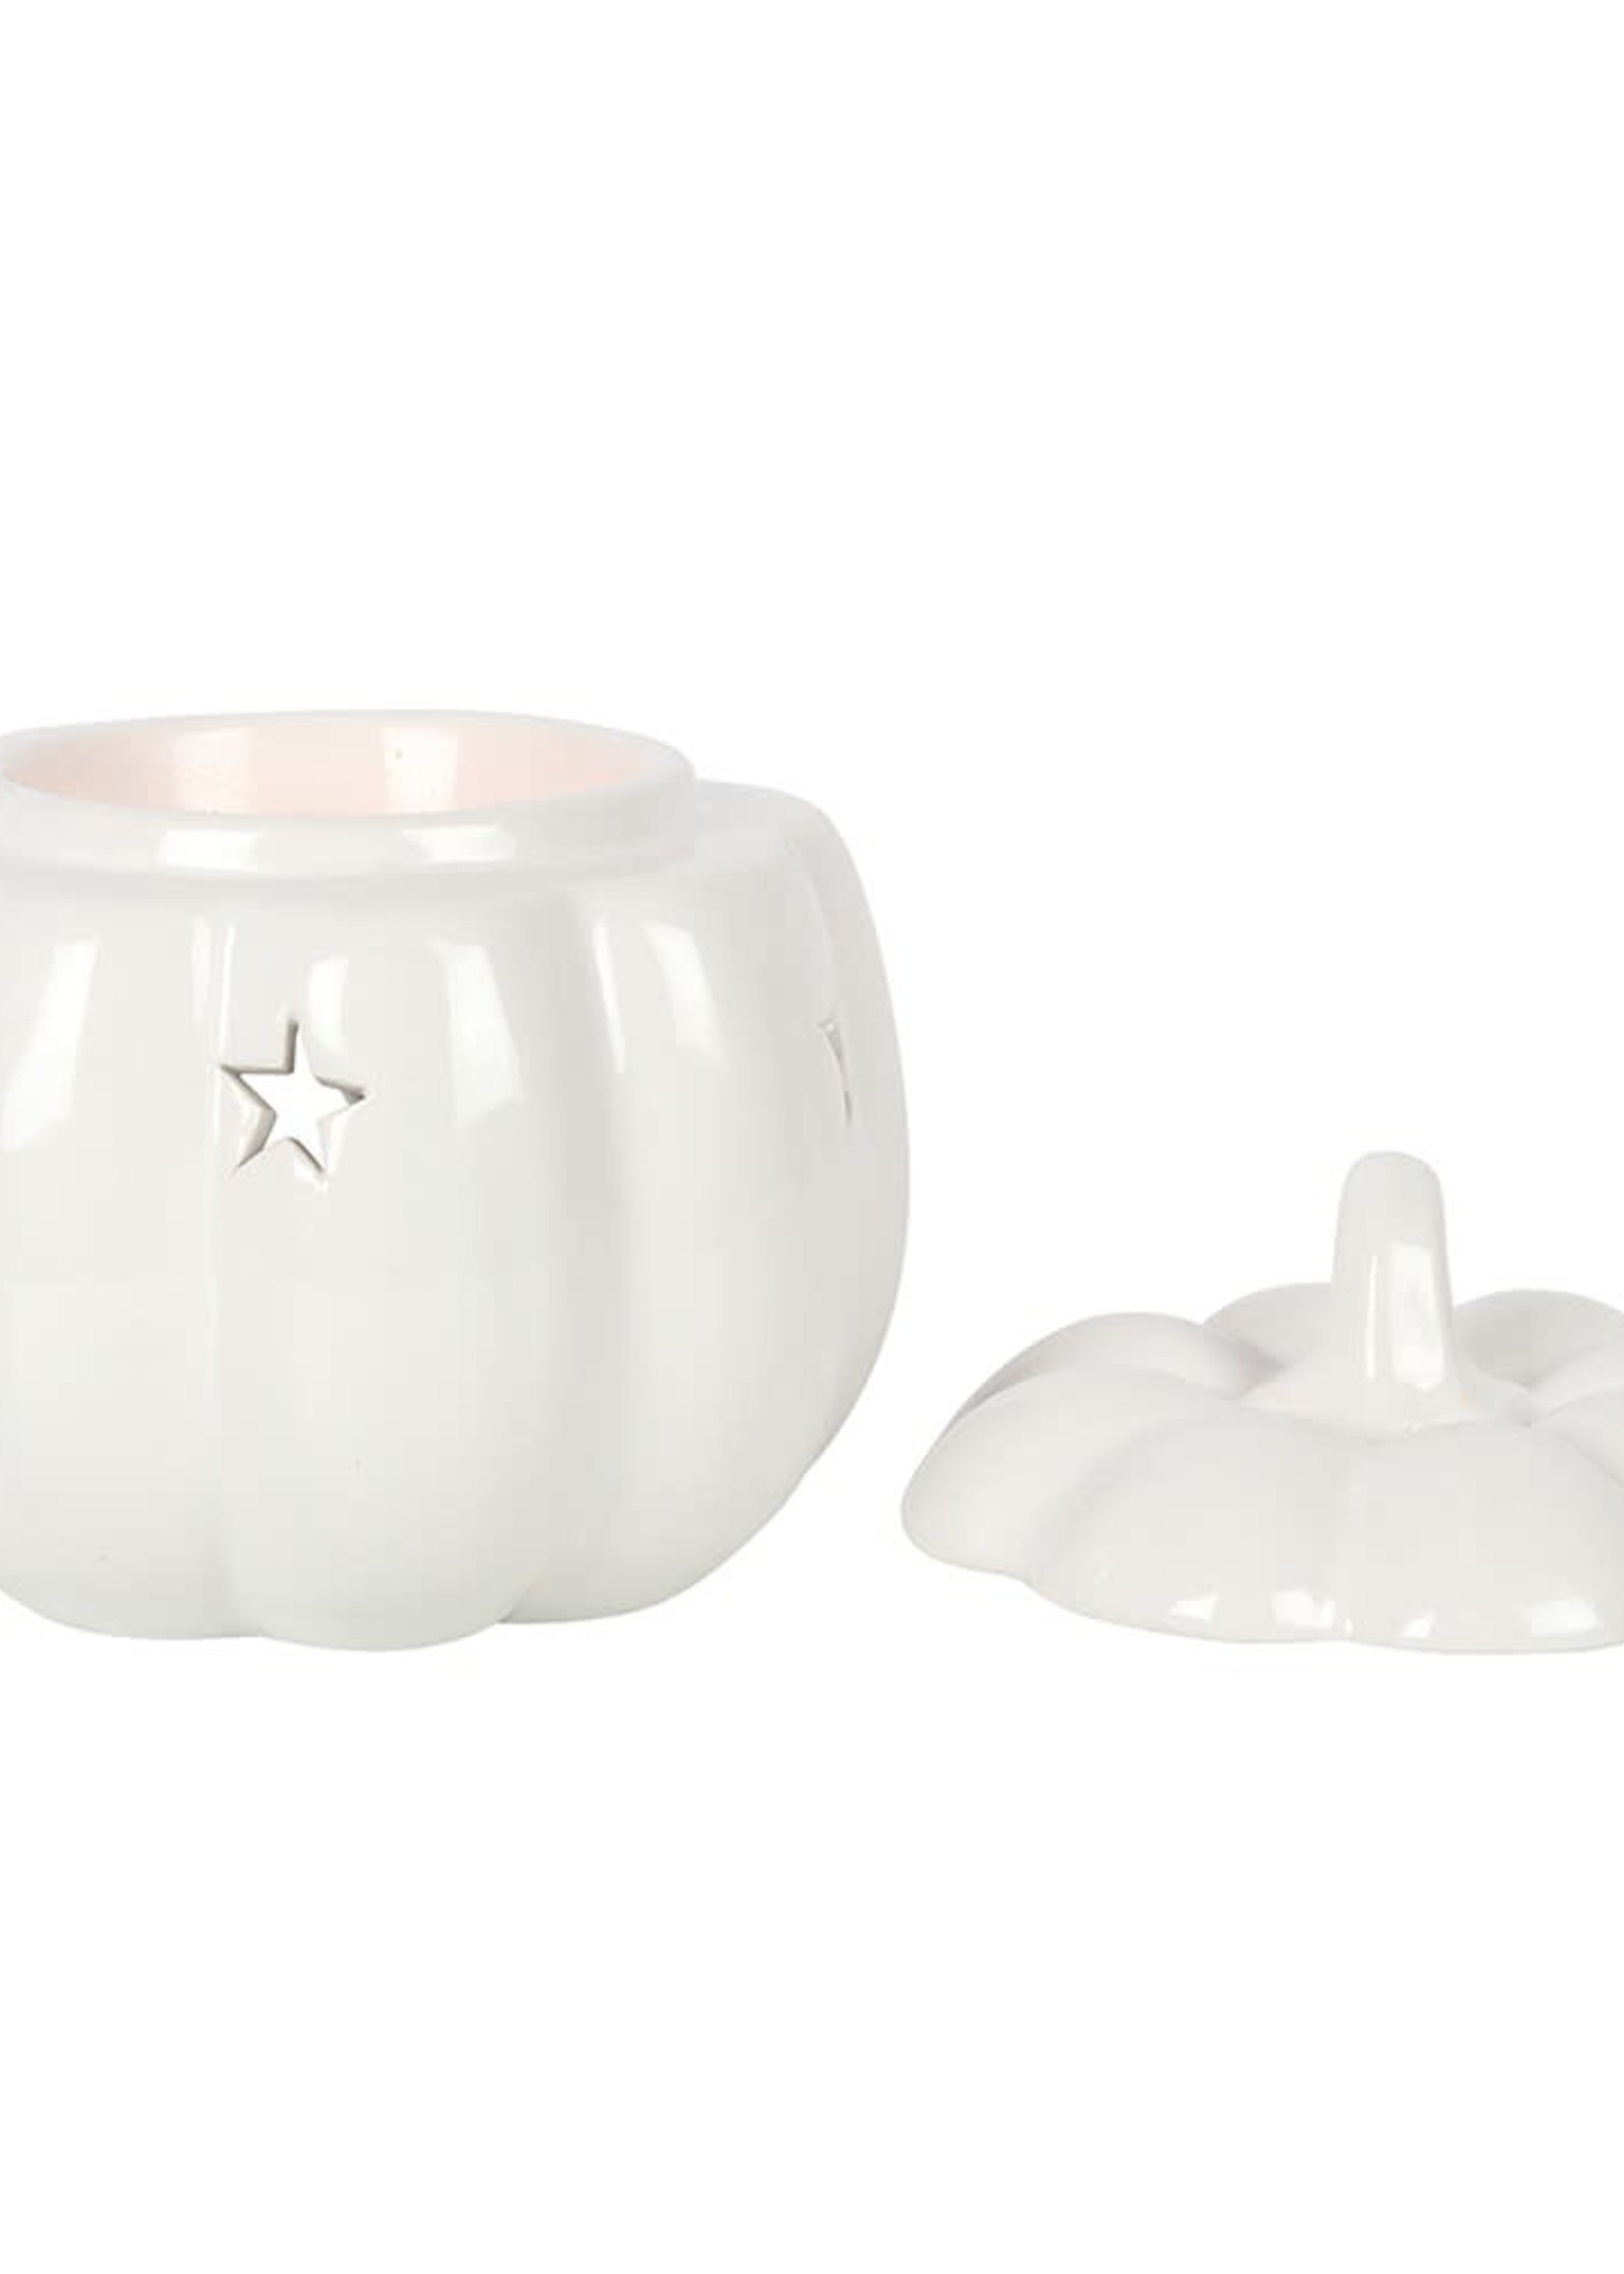 Something Different white pumpkin oil burner and wax warmer